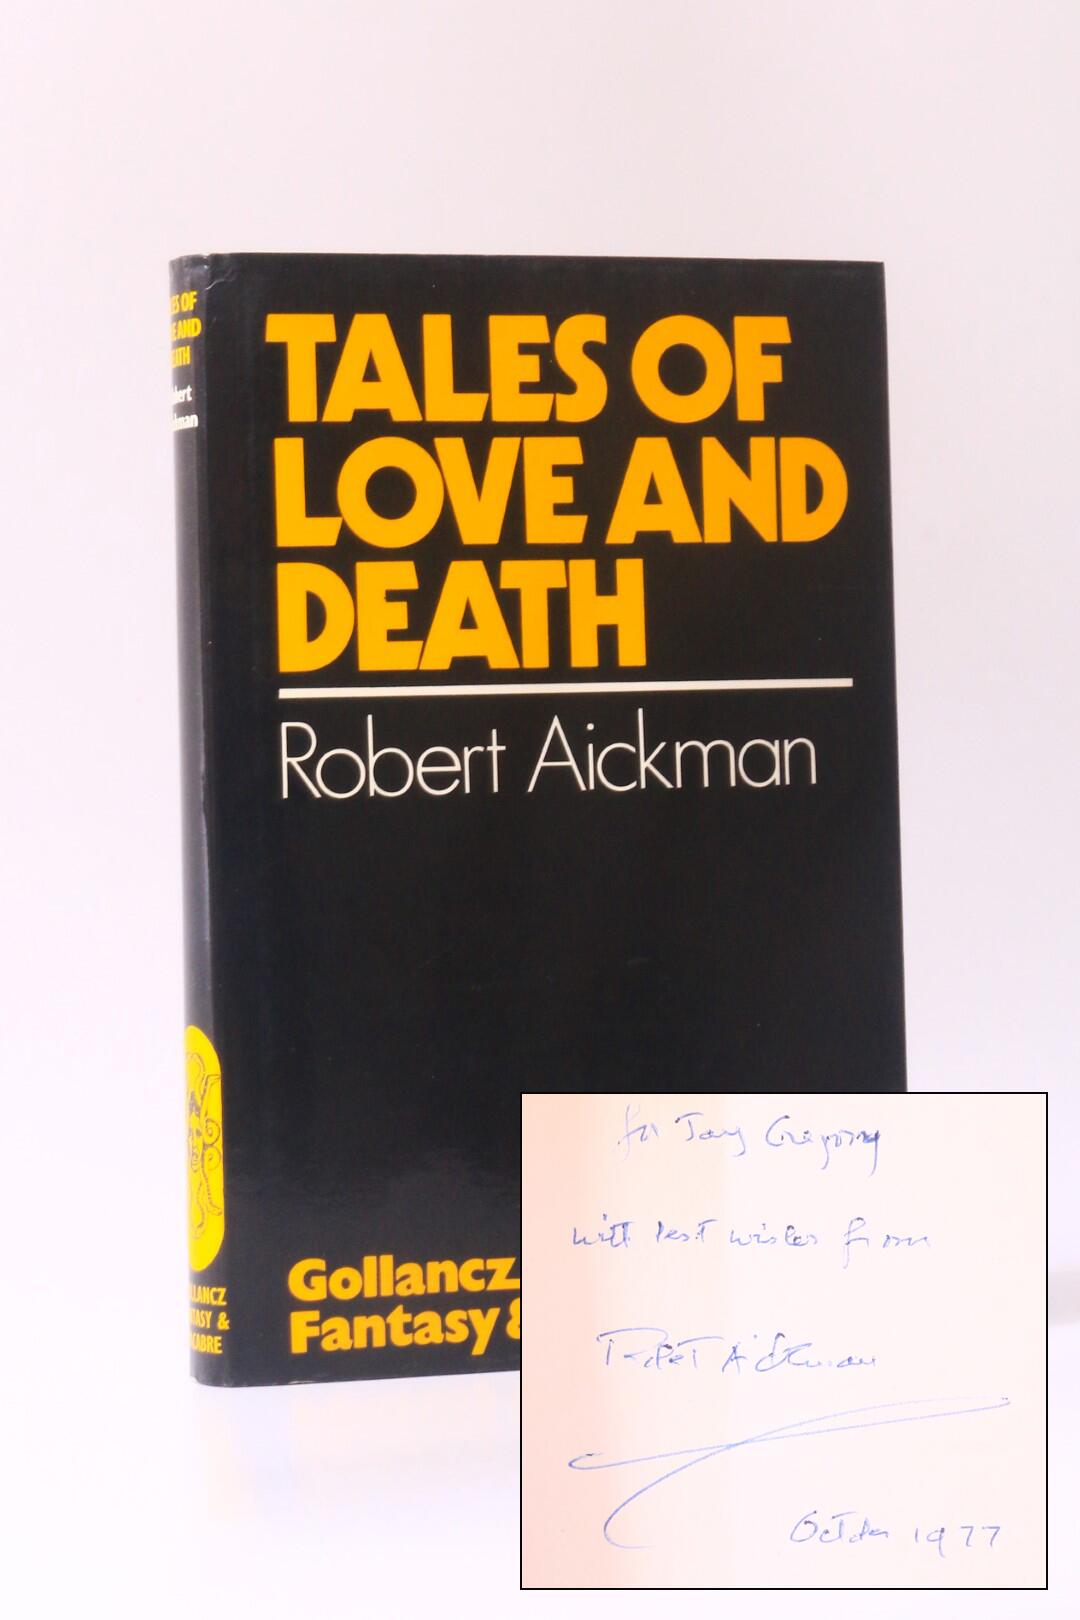 Robert Aickman - Tales of Love and Death - Gollancz, 1977, Signed First Edition.